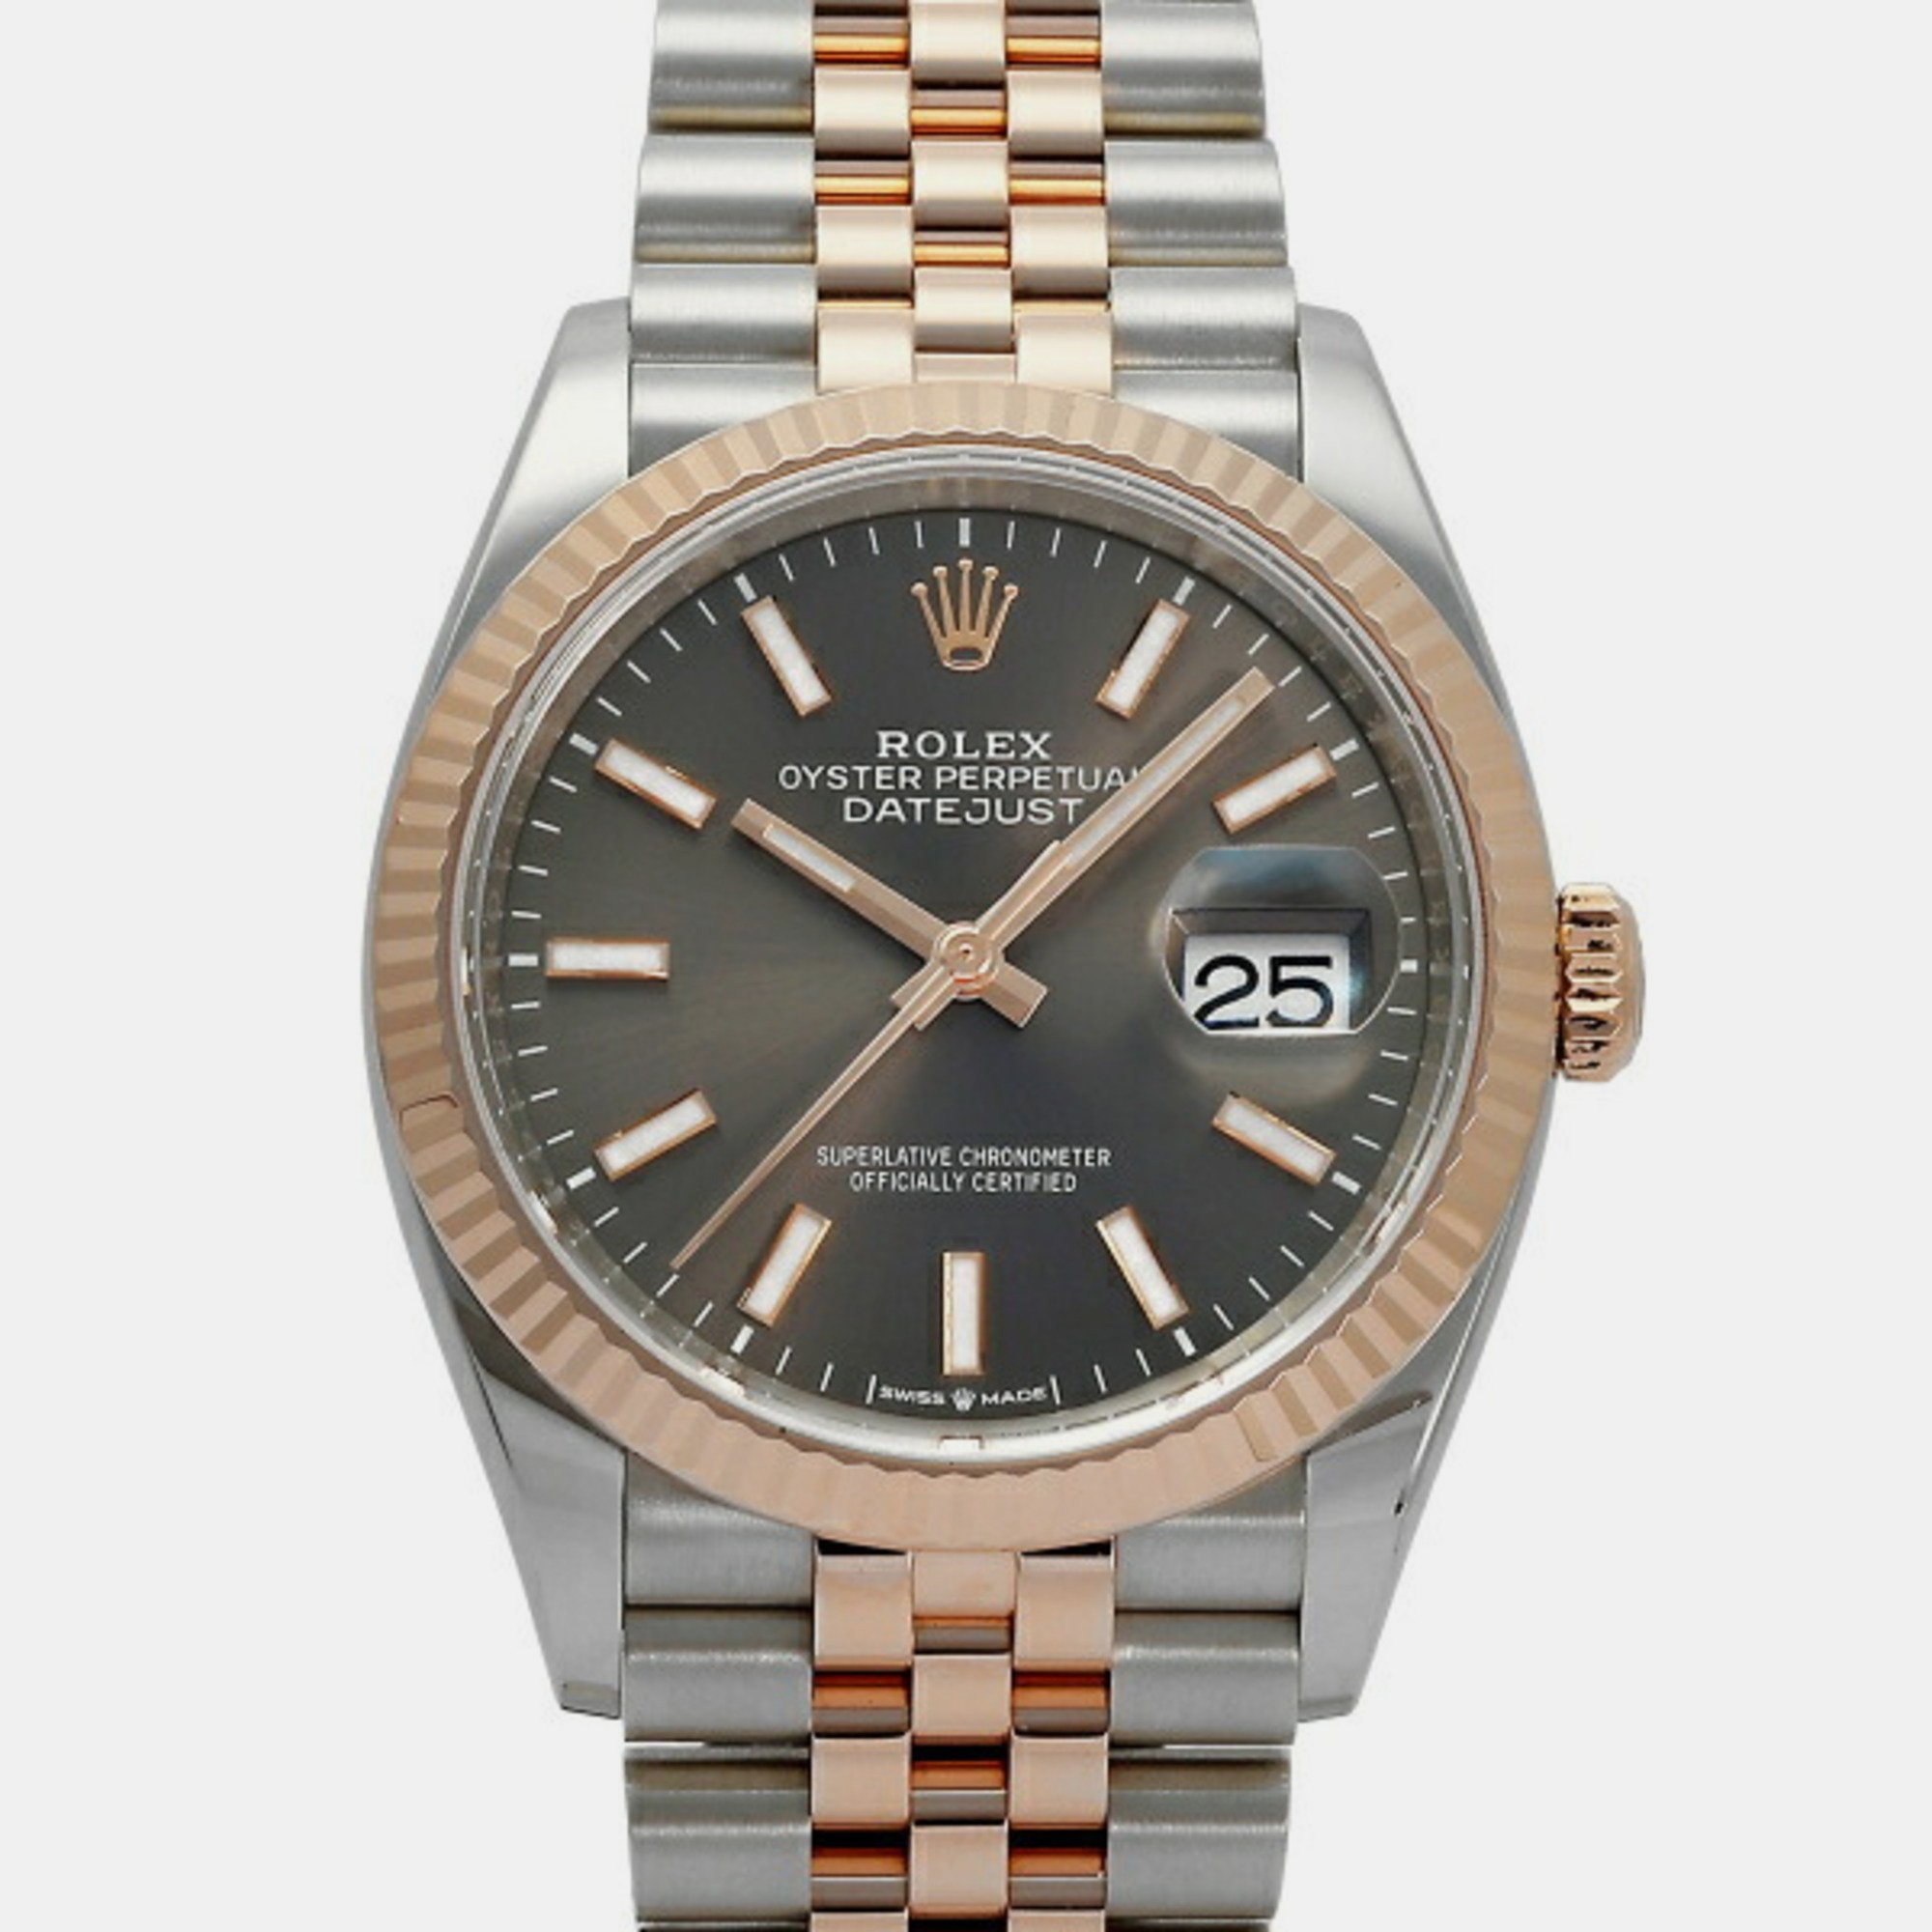 

Rolex Grey 18k Rose Gold And Stainless Steel Datejust 126231 Automatic Men's Wristwatch 36 mm